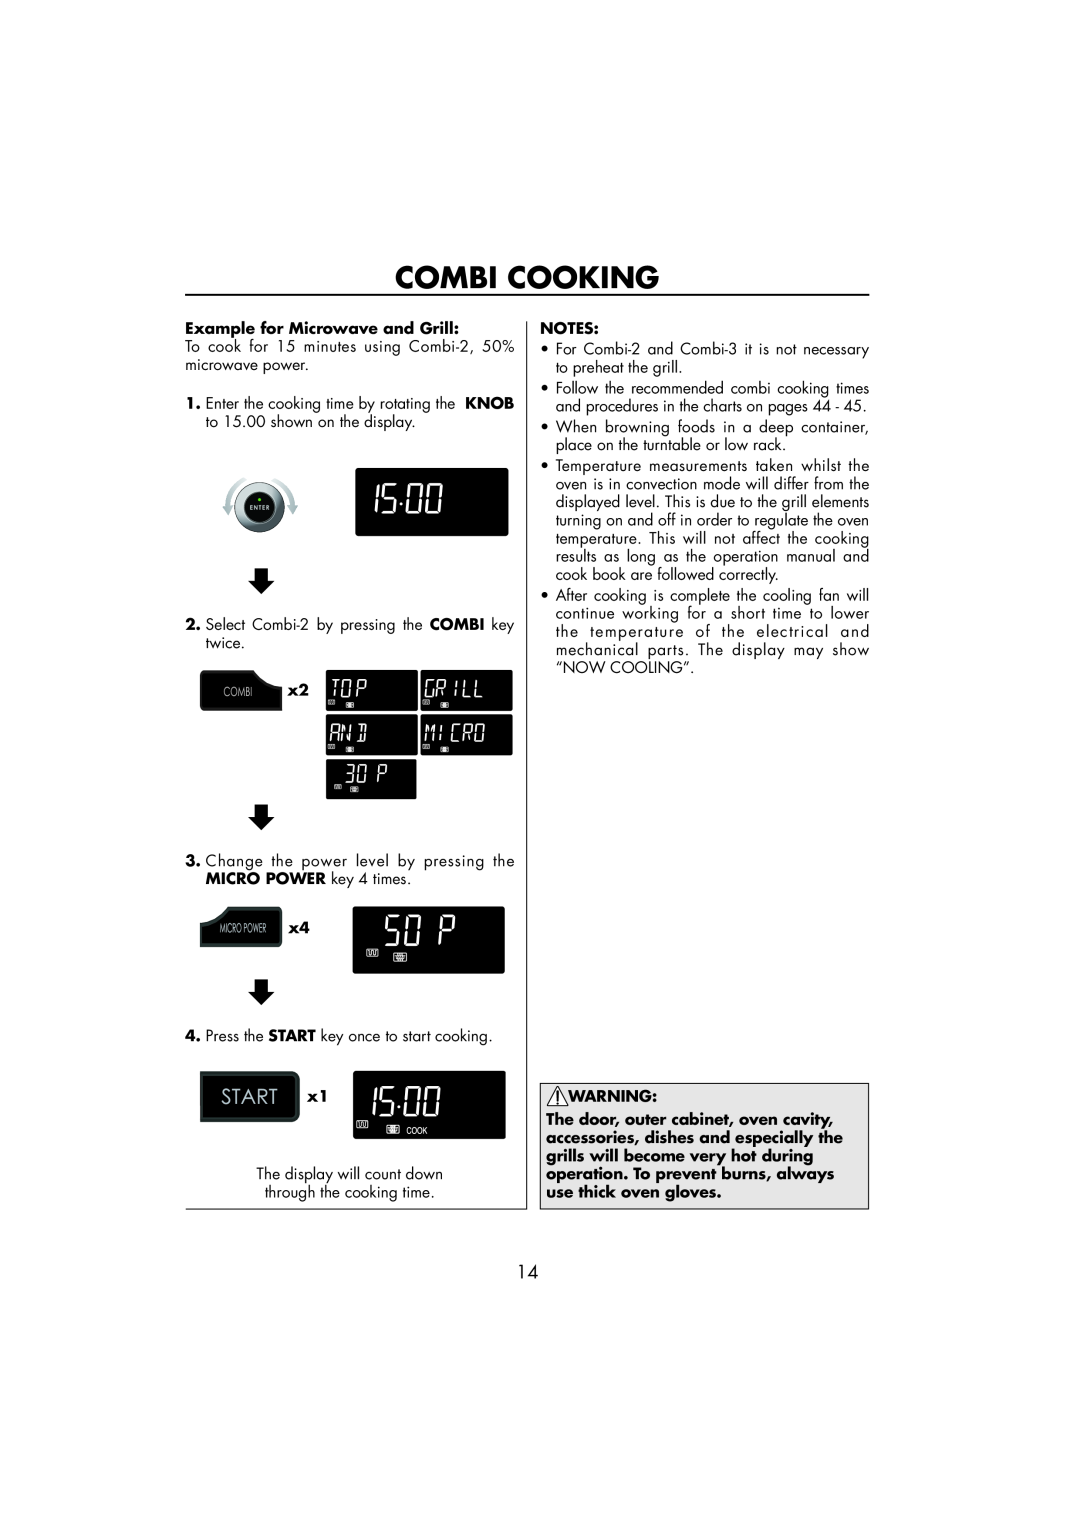 Sharp R-890SLM operation manual Combi Cooking, Example for Microwave and Grill 